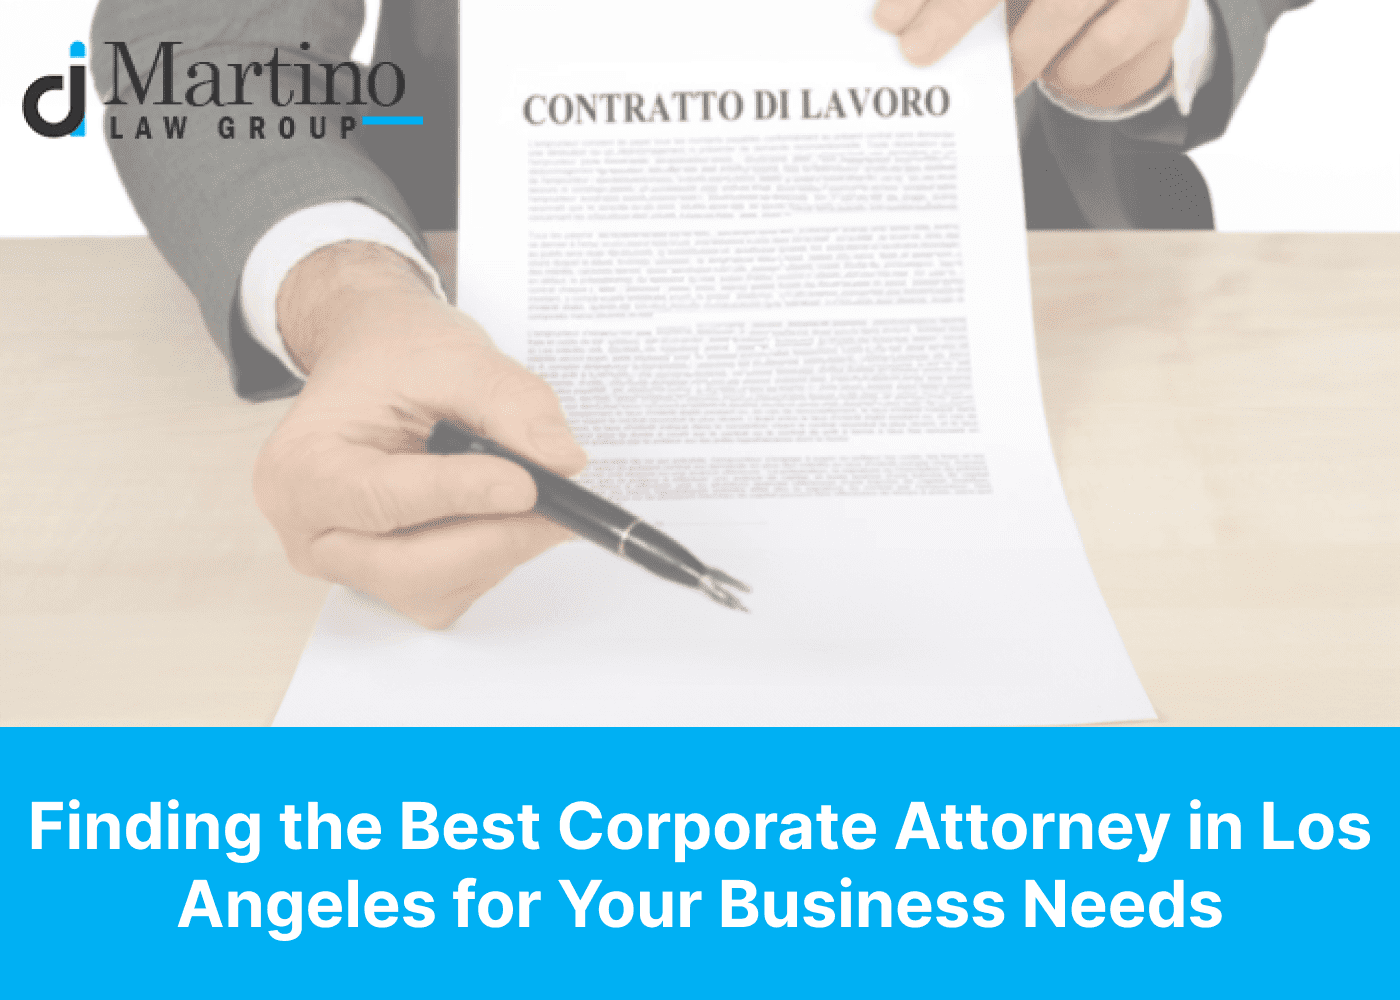 Finding the Best Corporate Attorney in Los Angeles for Your Business Needs